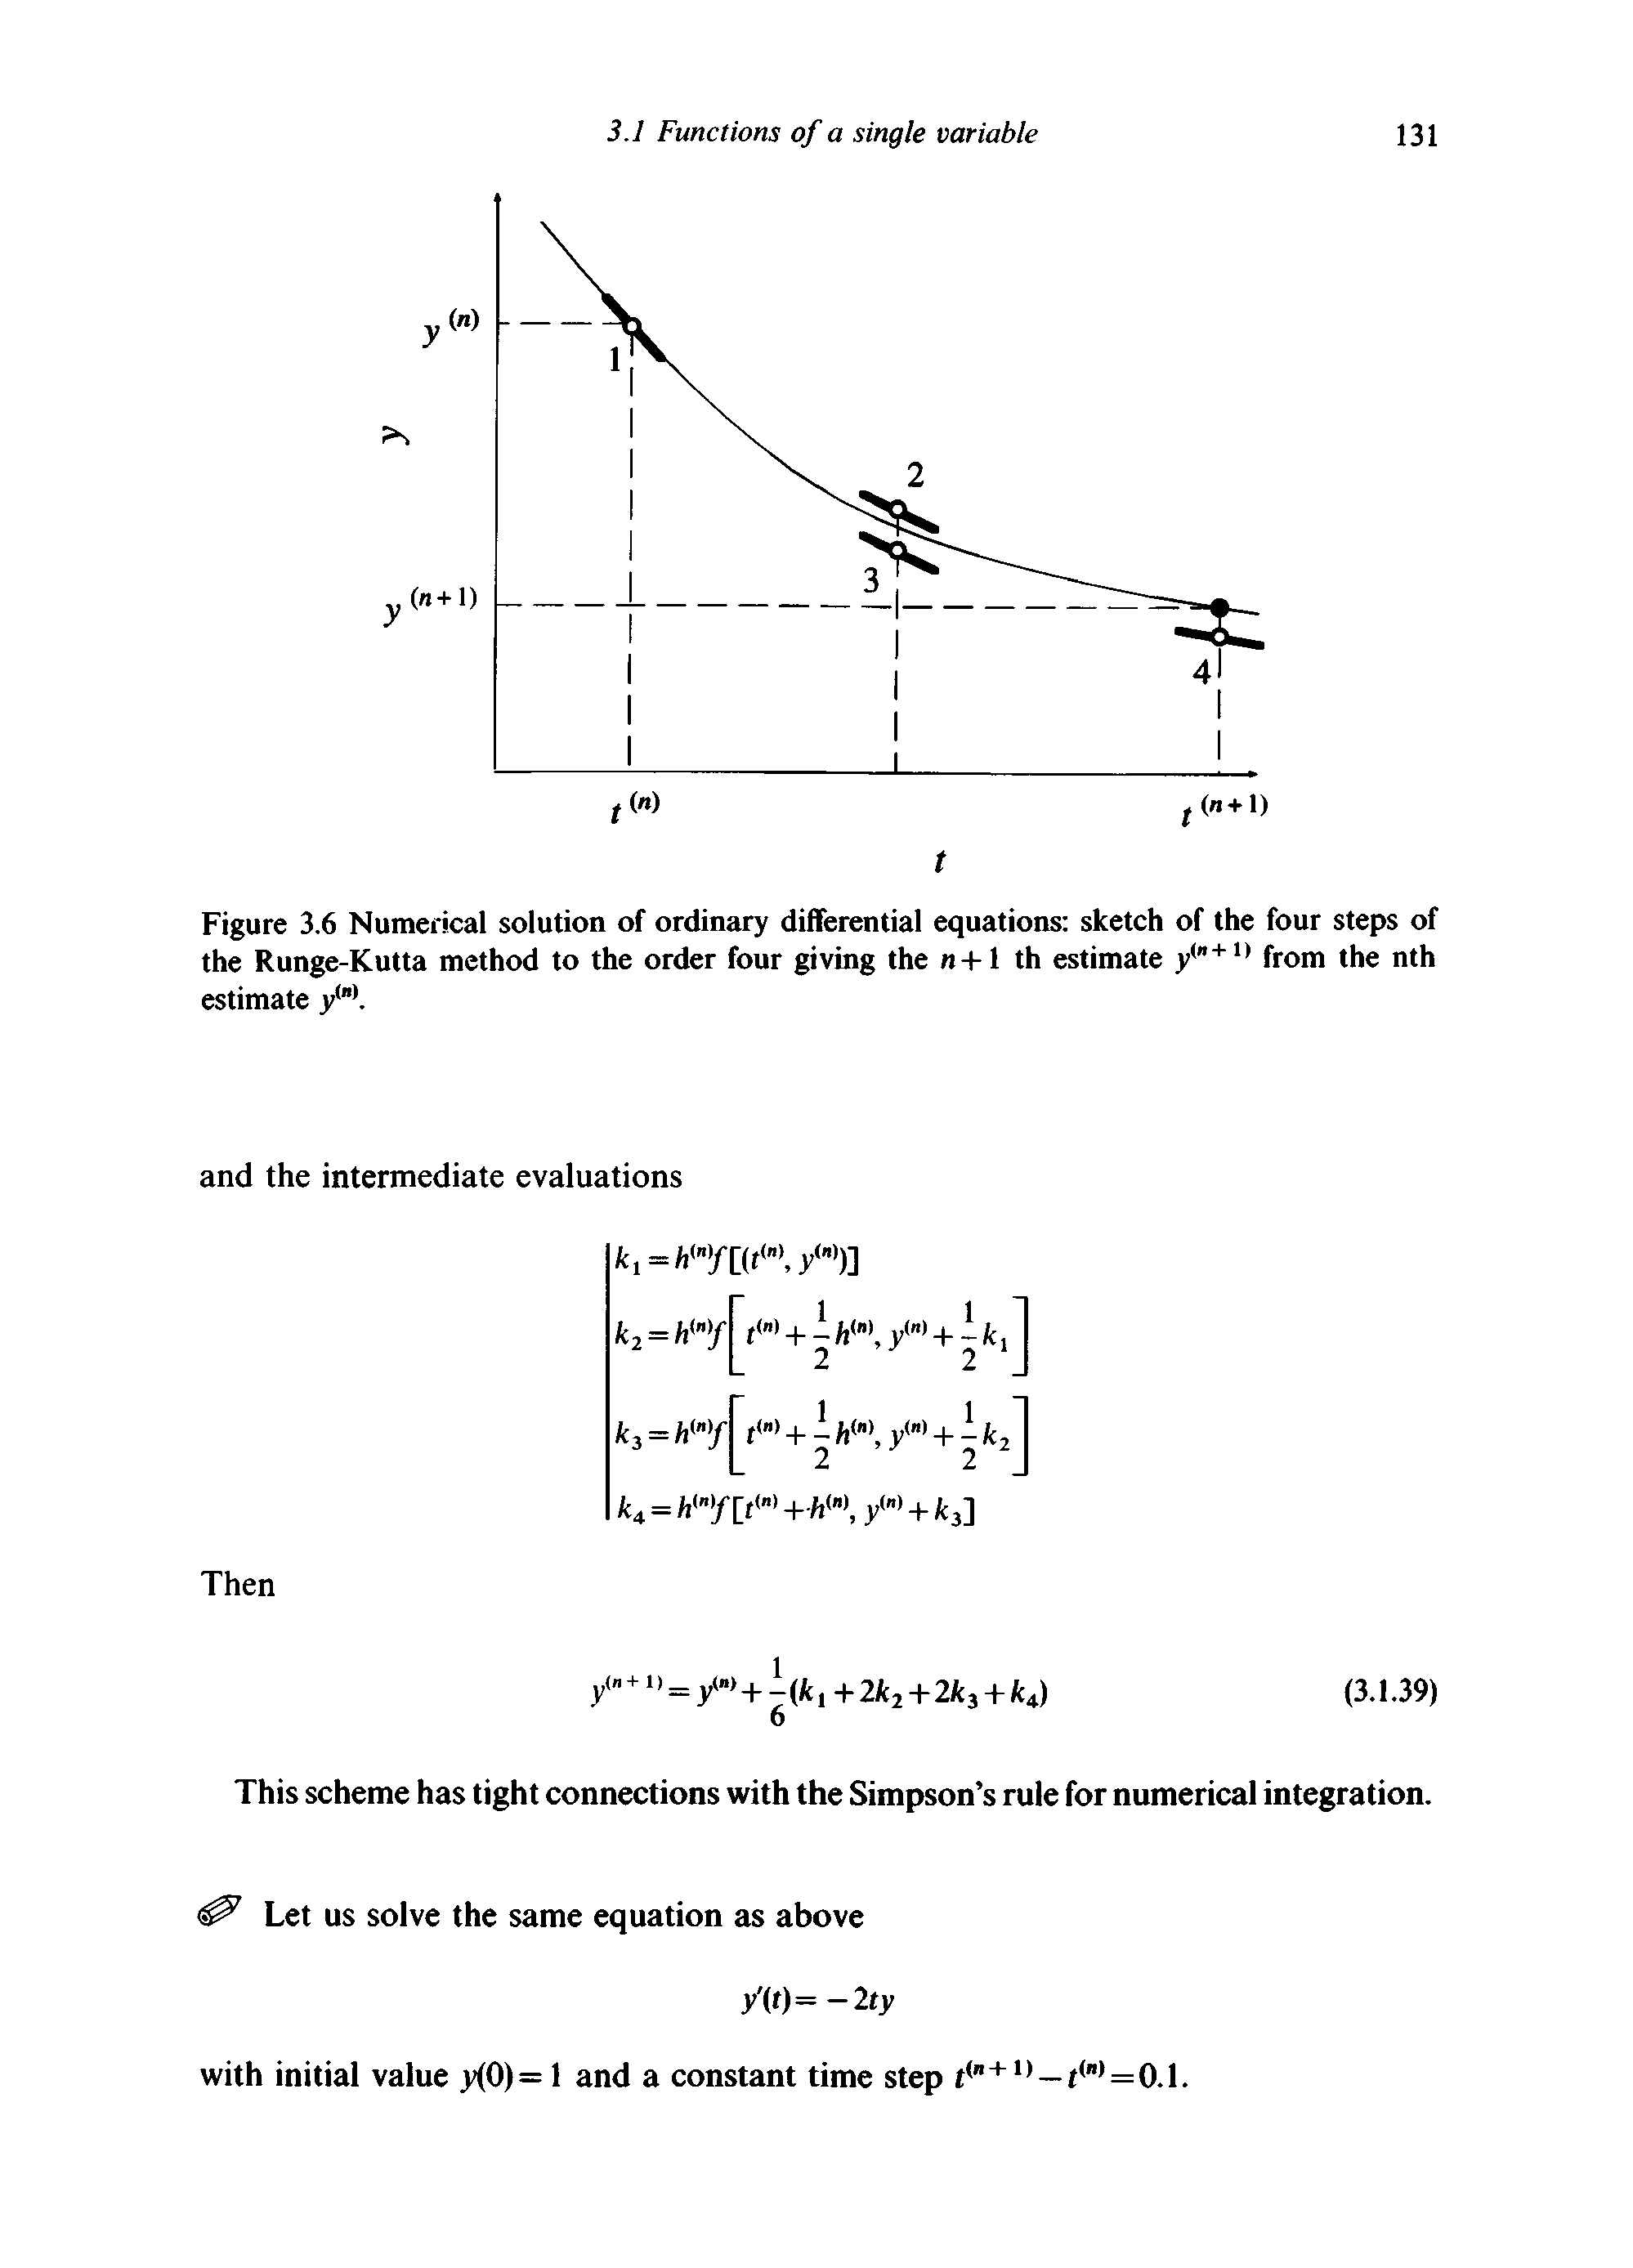 Figure 3.6 Numerical solution of ordinary differential equations sketch of the four steps of the Runge-Kutta method to the order four giving the n+1 th estimate y(n+1) from the nth estimate y ". ...